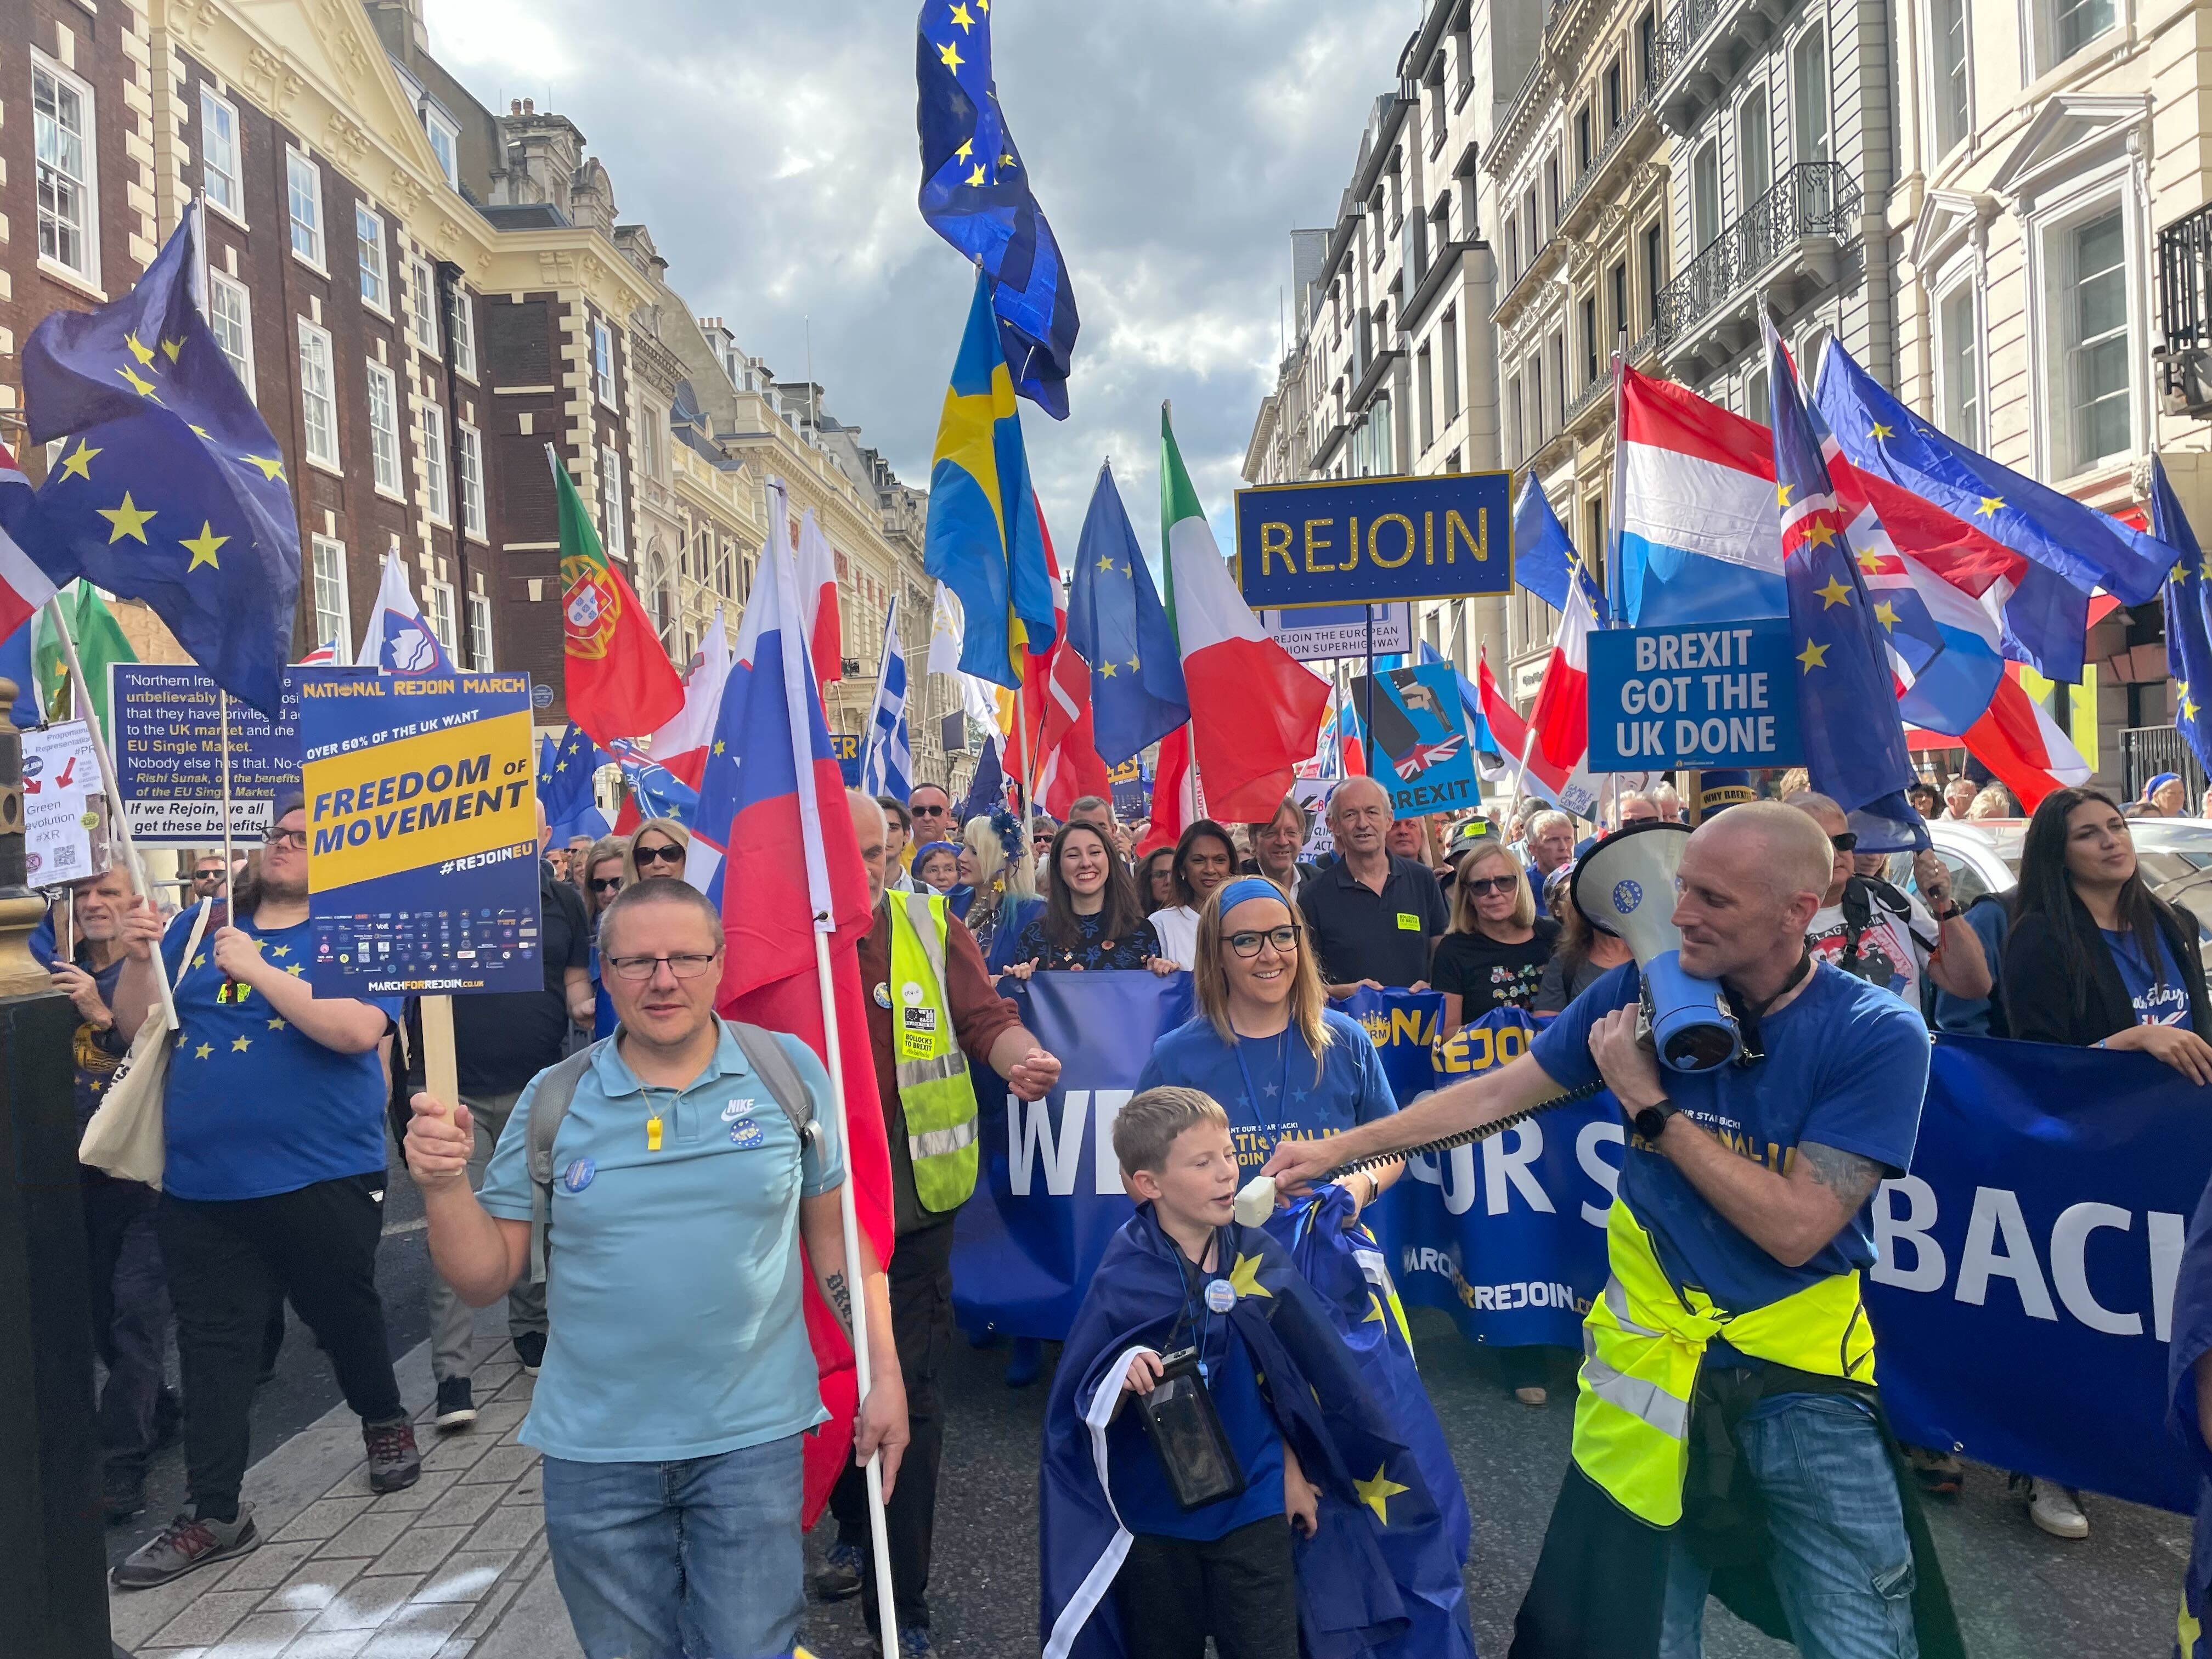 March headed to Parliament Square in London